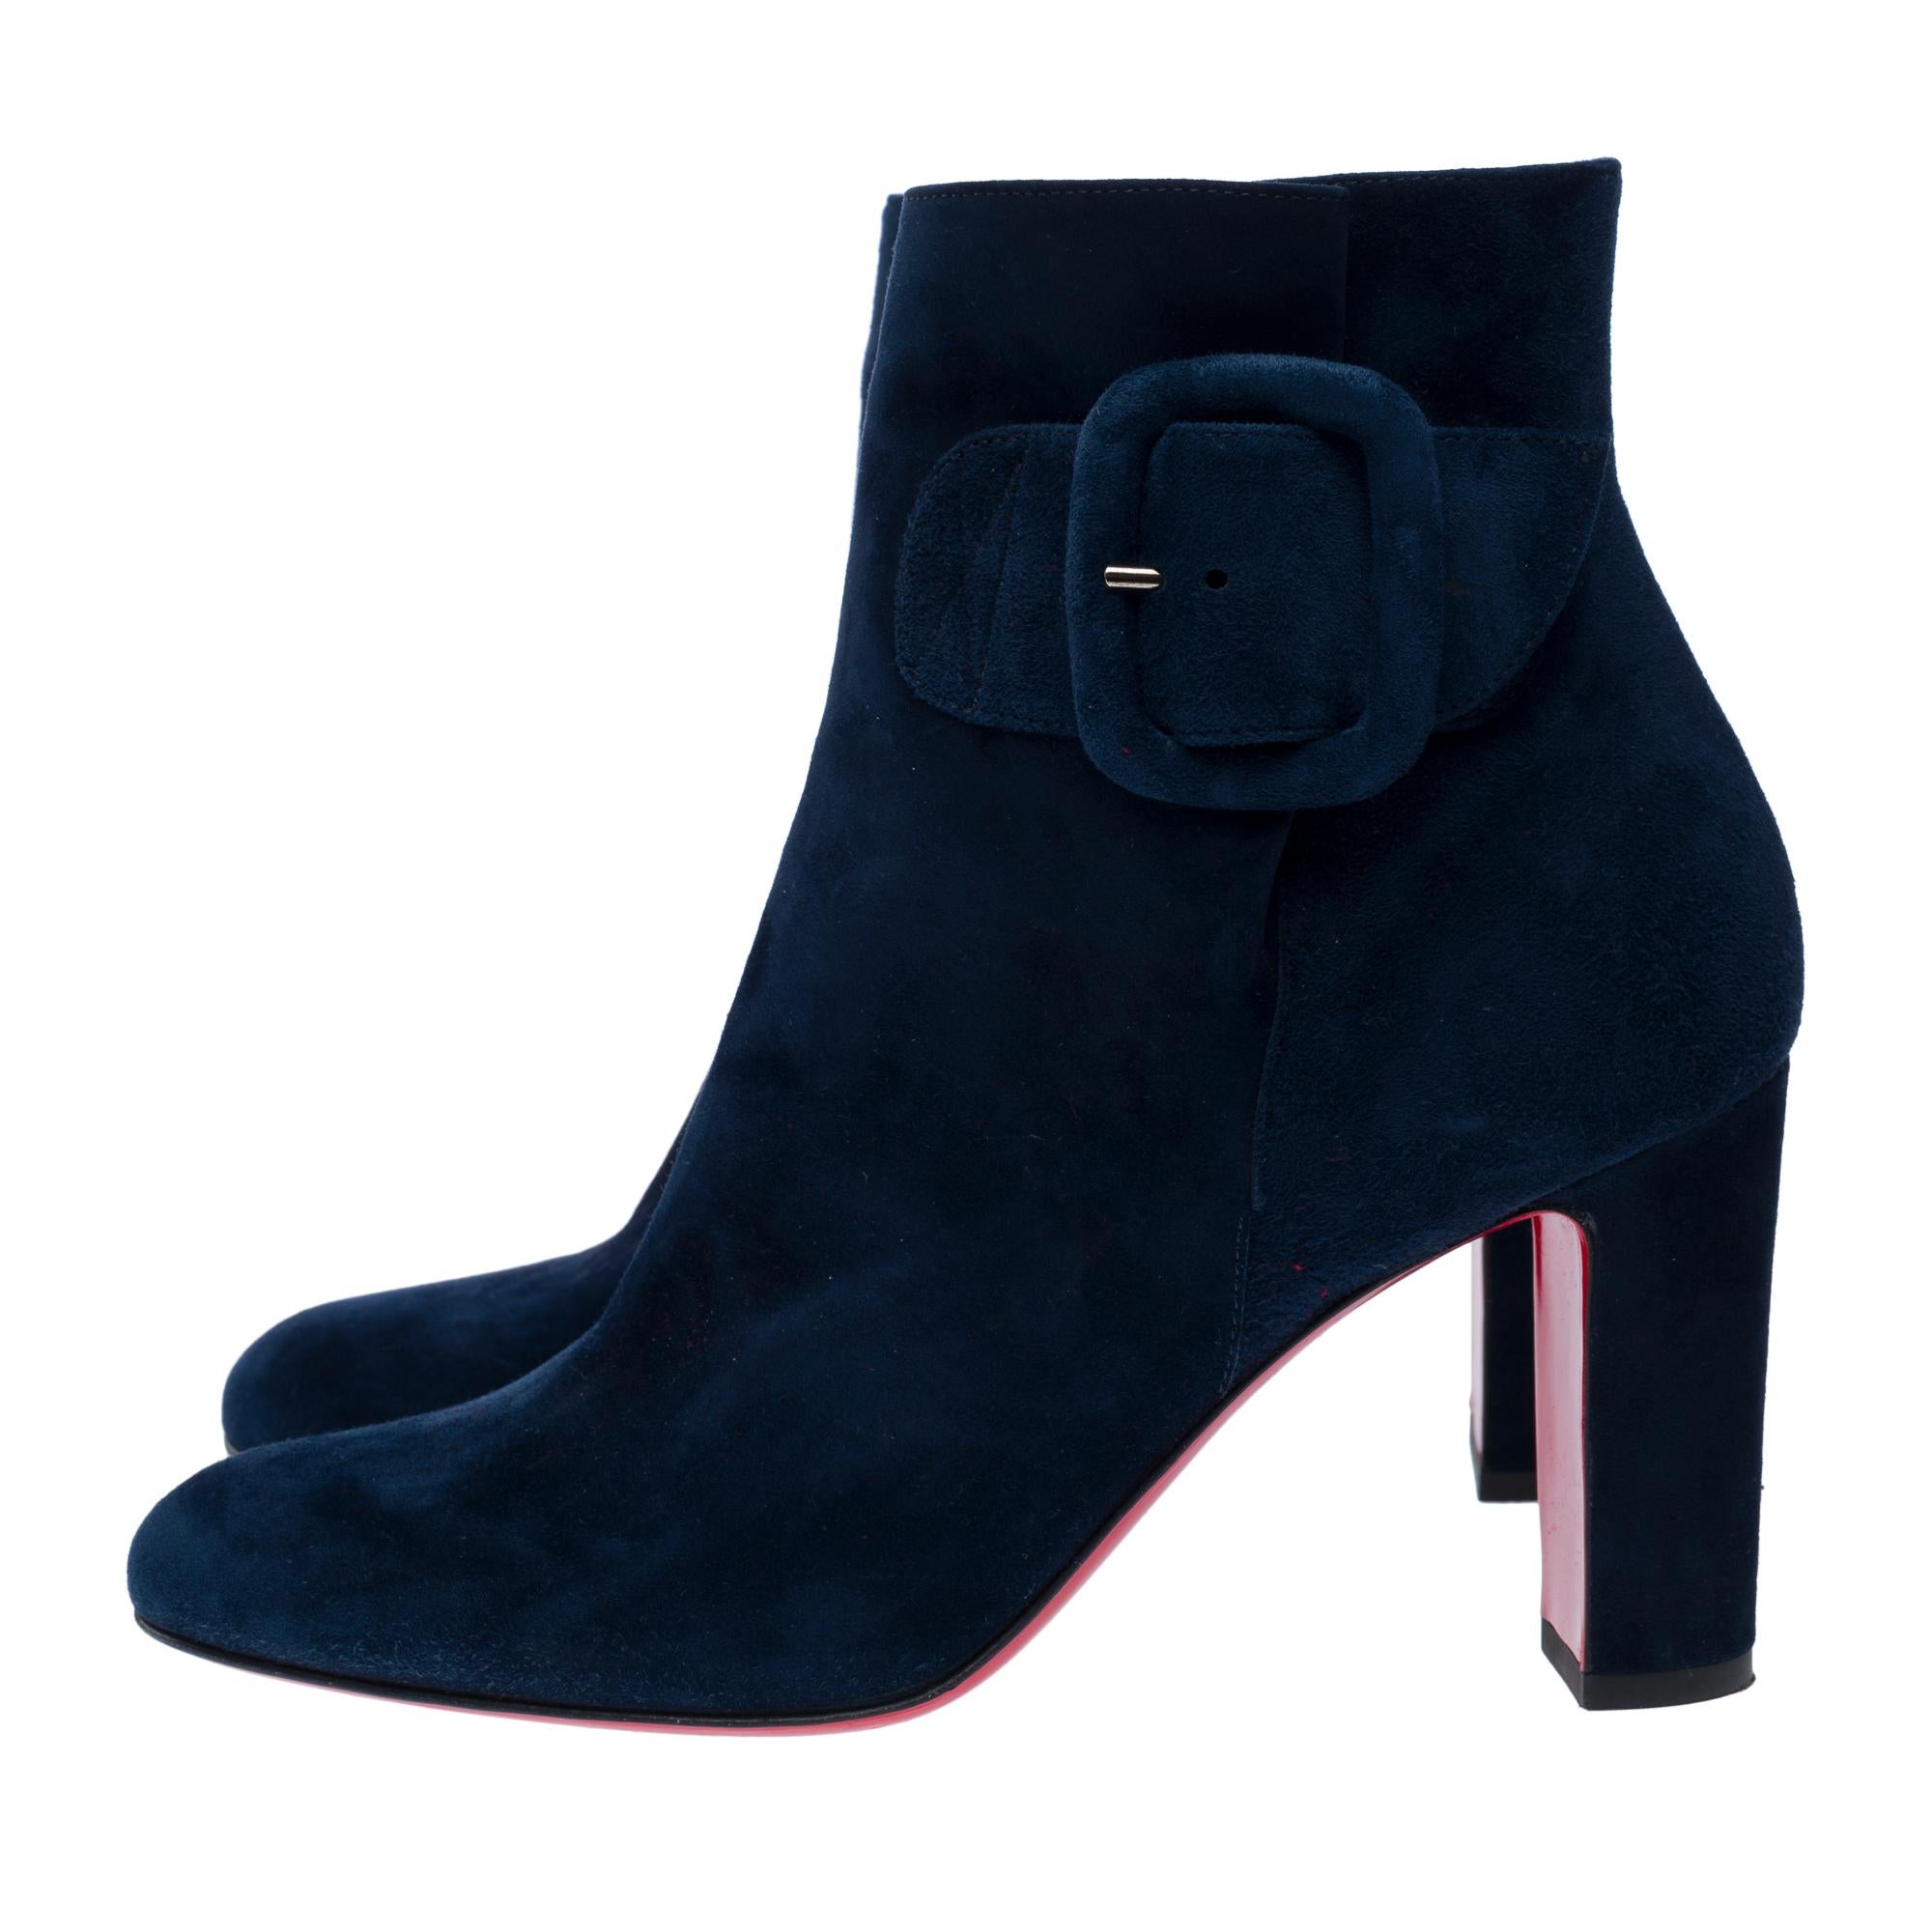 Christian Louboutin ankleboot in blue suede, size 37 For Sale 1